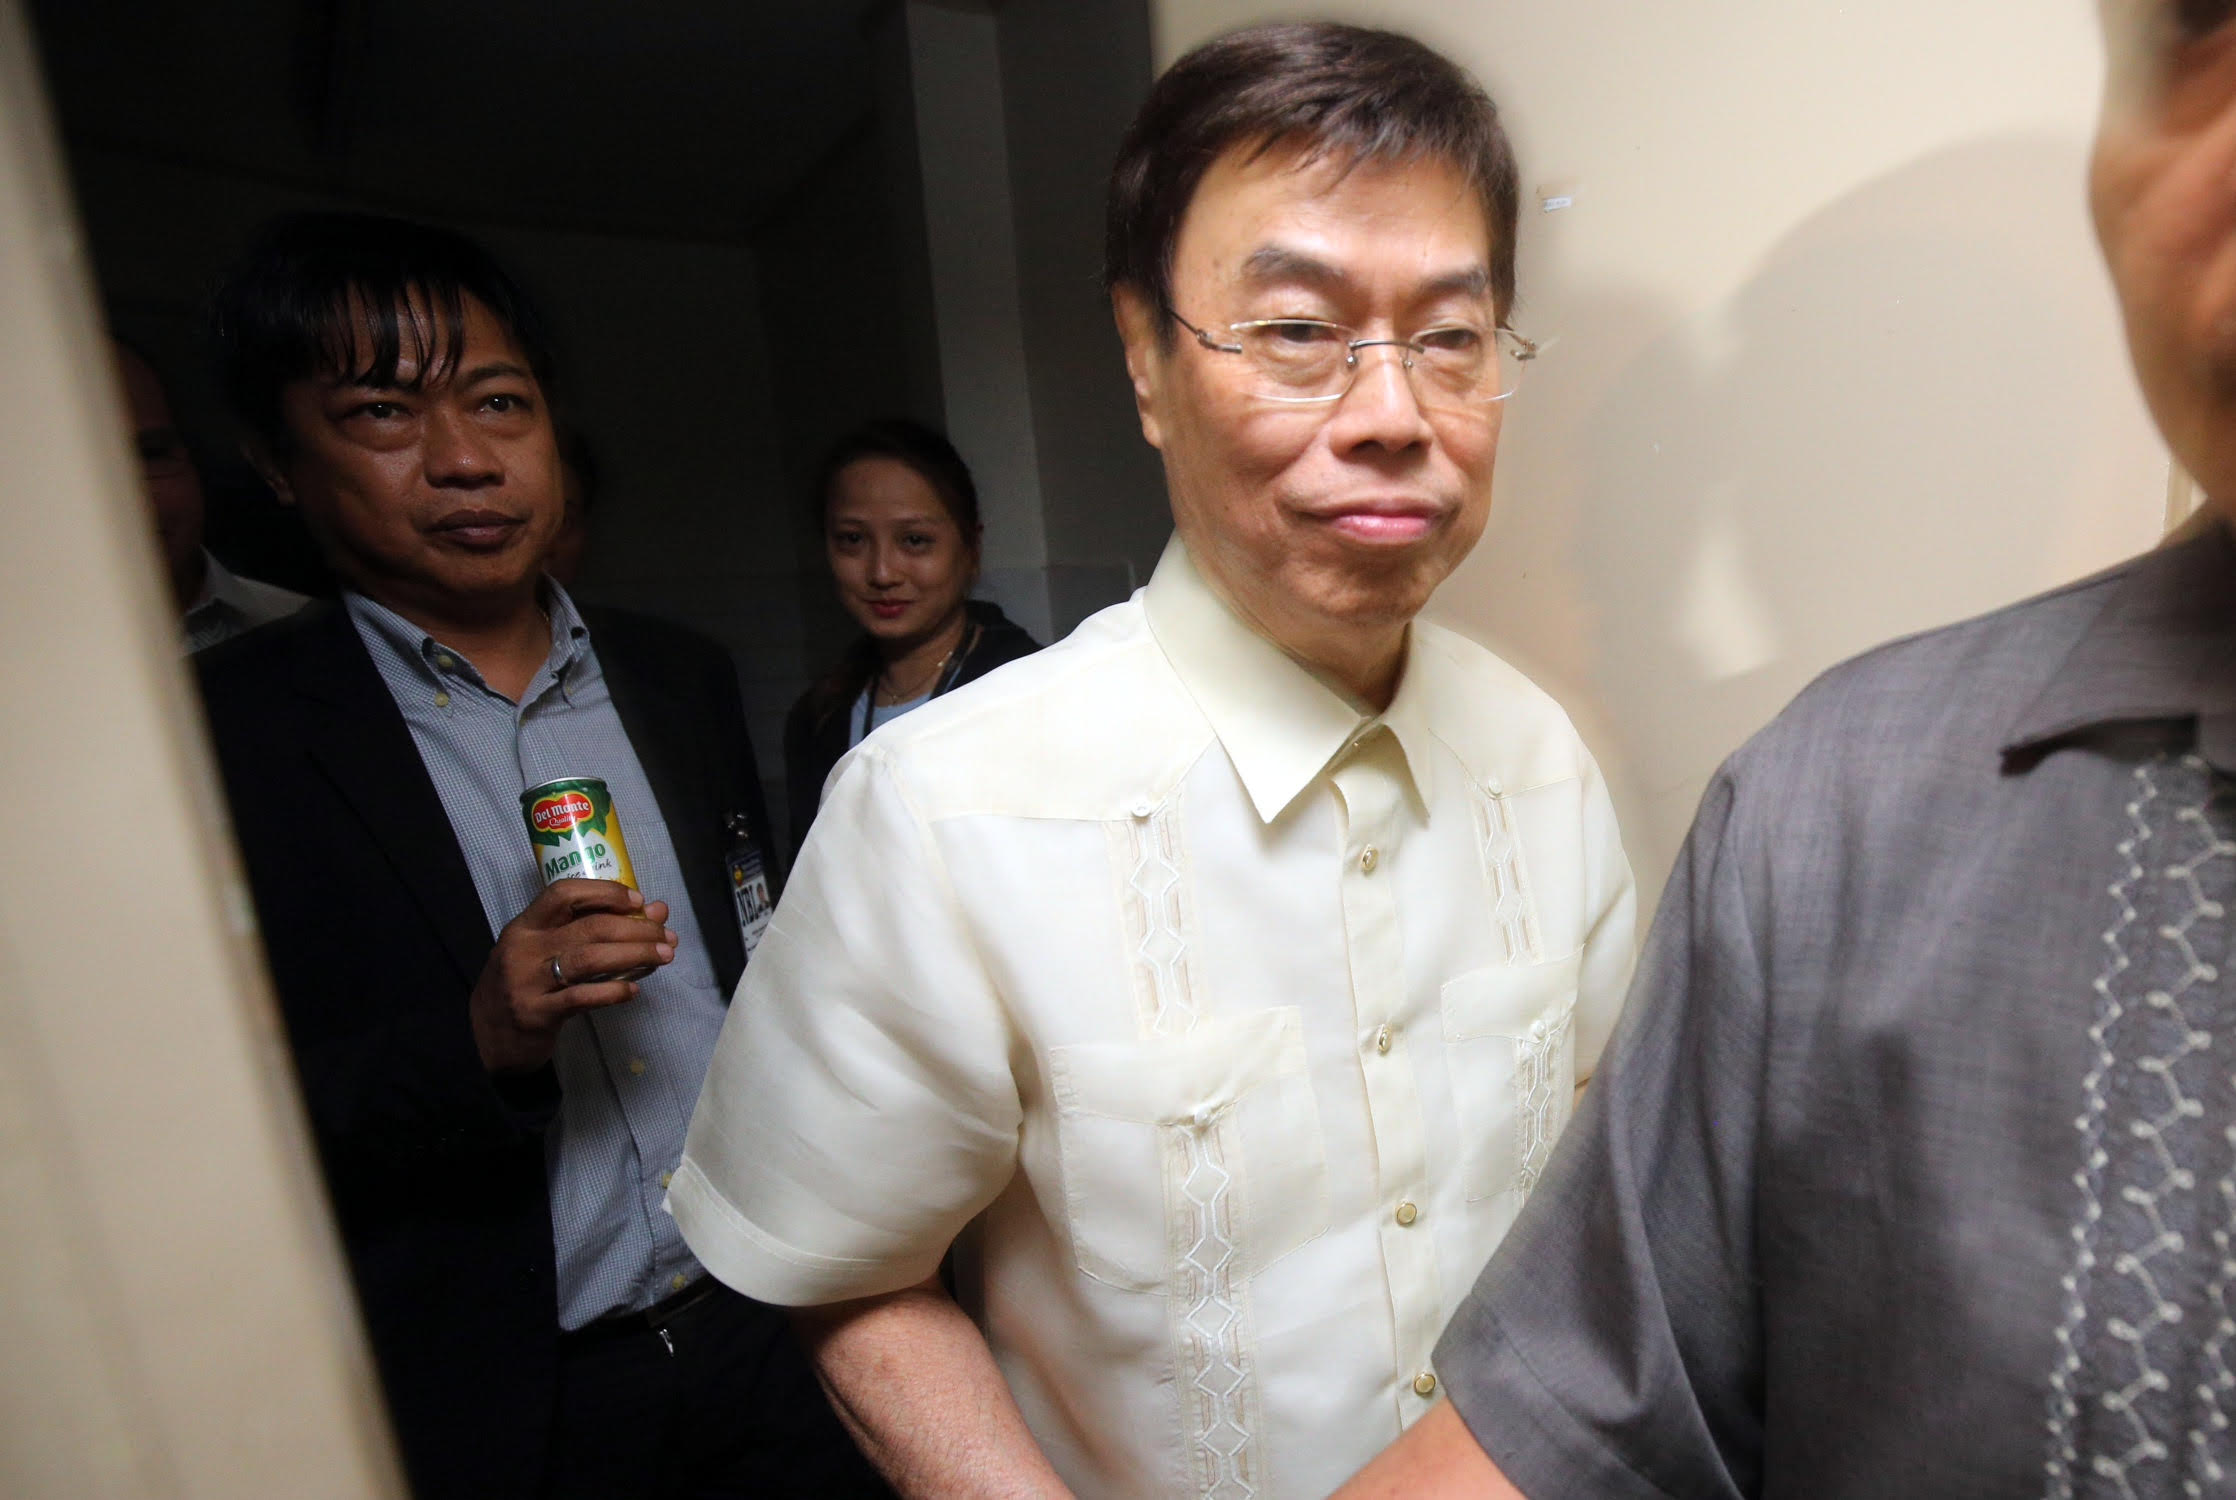 APPEARANCE BEFORE NBI. Alleged drug lord Peter Lim is escorted by security after he shows up at the National Bureau of Investigation in Manila on July 21, 2016. File photo by Ben Nabong/Rappler 